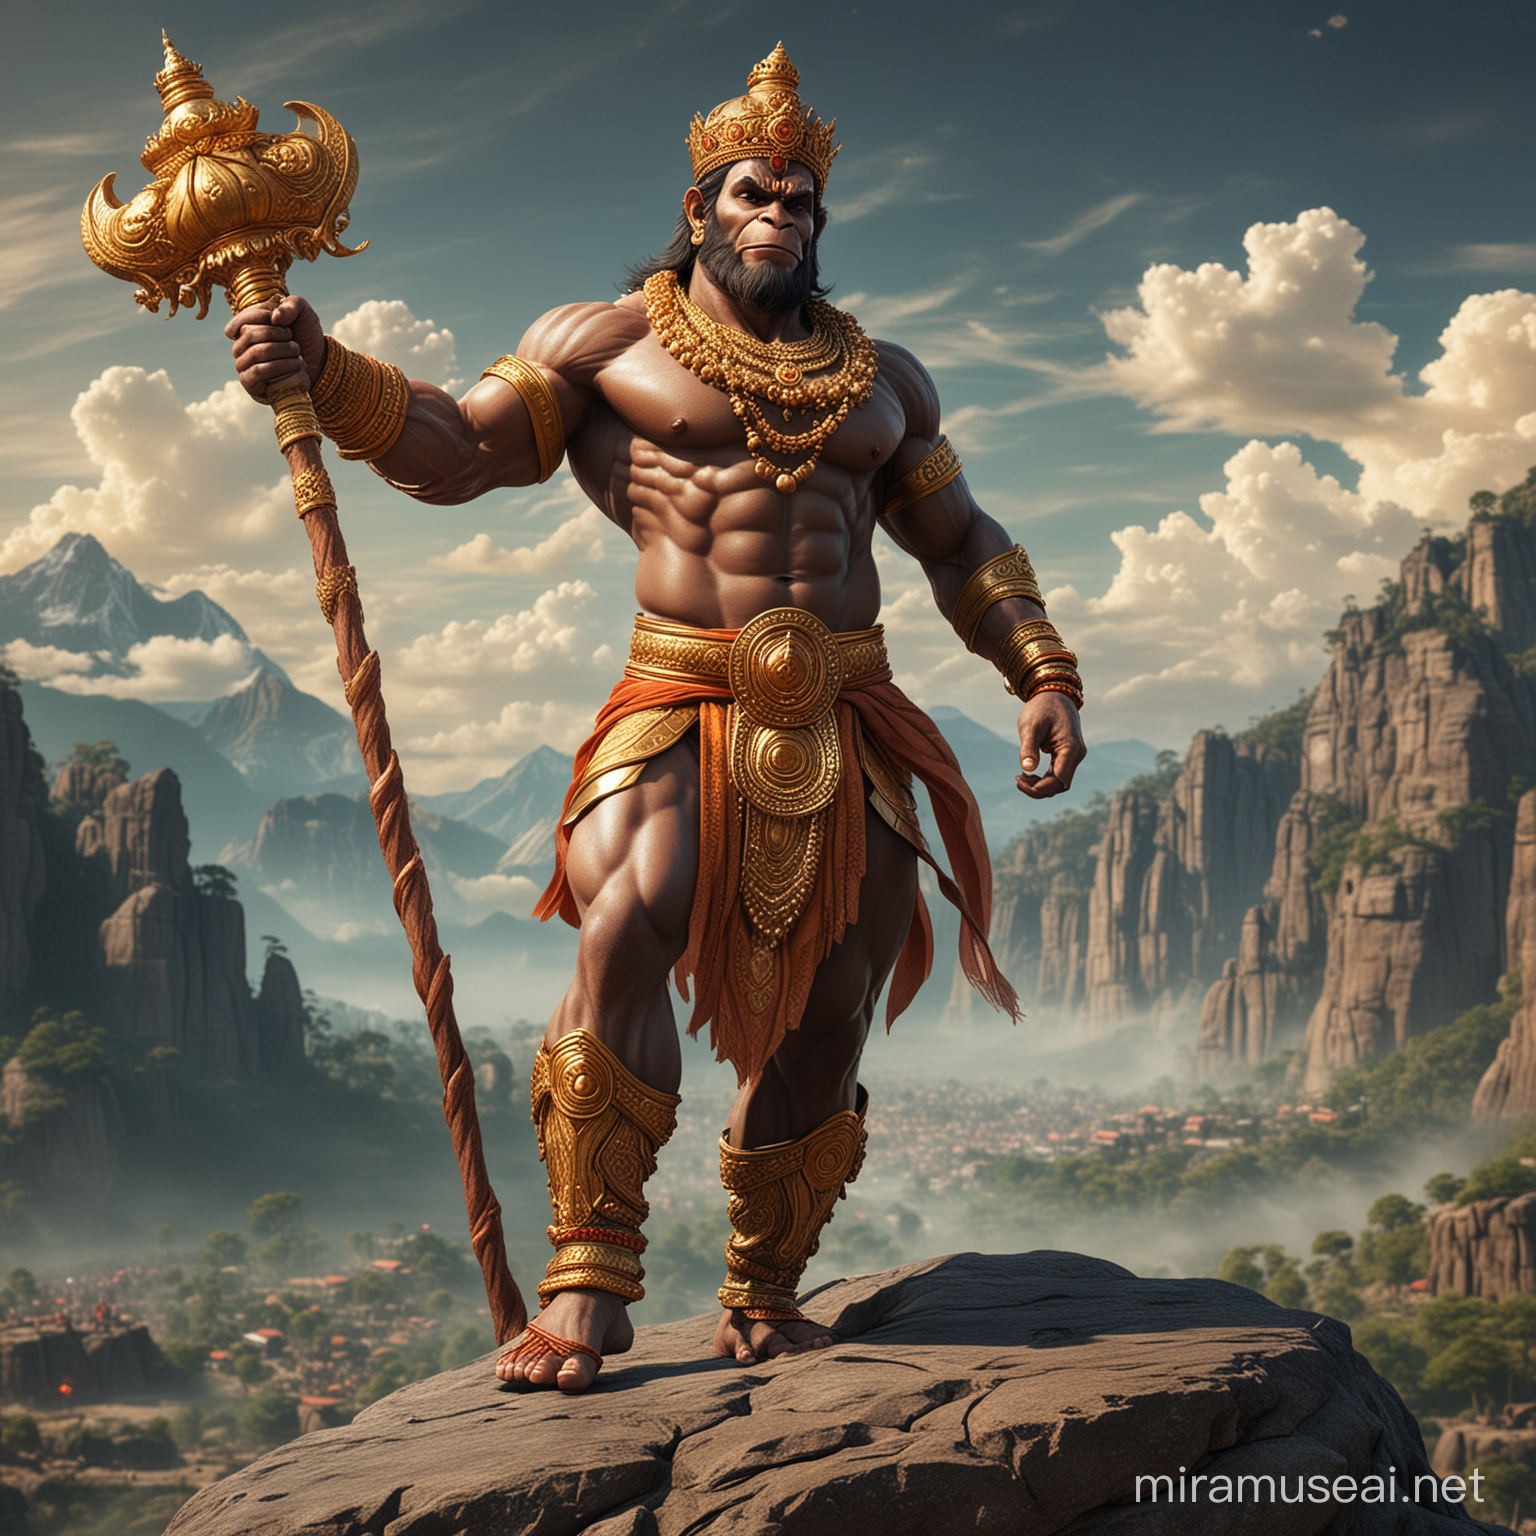 God Hanuman very muscular, tall, godly face, holding a long handle  huge Golden mace bomb in right hand, wearing crown, standing on a hill top, one leg stepping on a big rock, battle field in the background, detailed and intricate environment, dynamic pose, muscles defined with chiseled aesthetics, traditional attire draped elegantly, vivid, ultra realistic. 
Hanuman's face is depicted glowing with a divine radiance, symbolizing his divine nature and spiritual power. His aura signifies his purity, courage, and divine protection.
Hanuman is shown wearing a crown or headgear adorned with jewels, symbolizing his royal lineage and divine status as a deity.
Hanuman's face embodies a combination of strength, wisdom, devotion, and compassion.